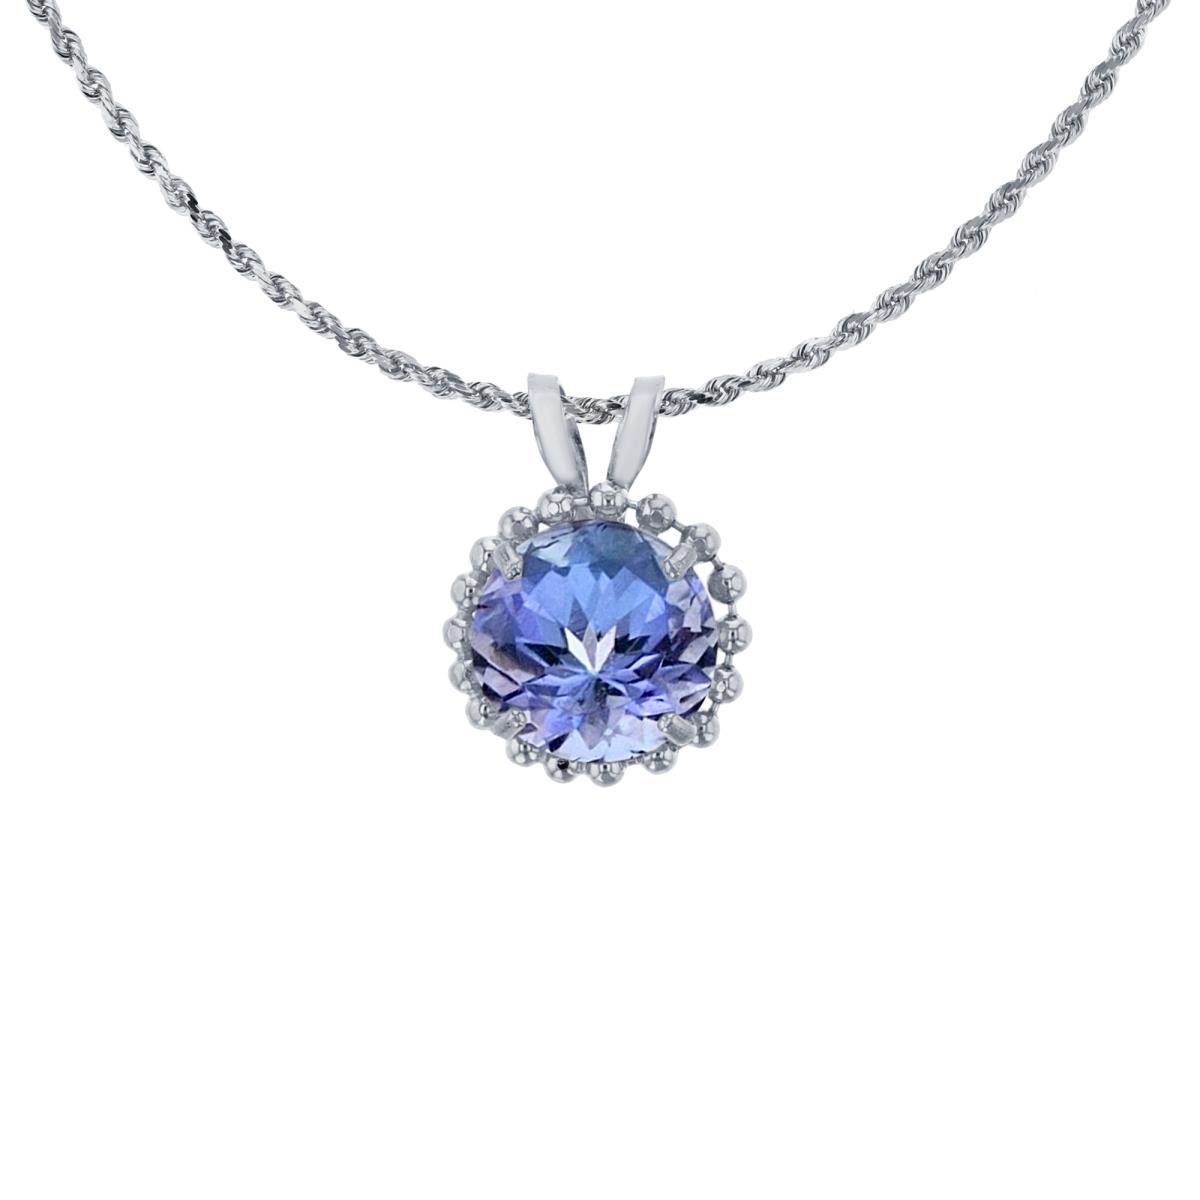 10K White Gold 6mm Rd Cut Tanzanite with Bead Frame Rabbit Ear 18" Necklace